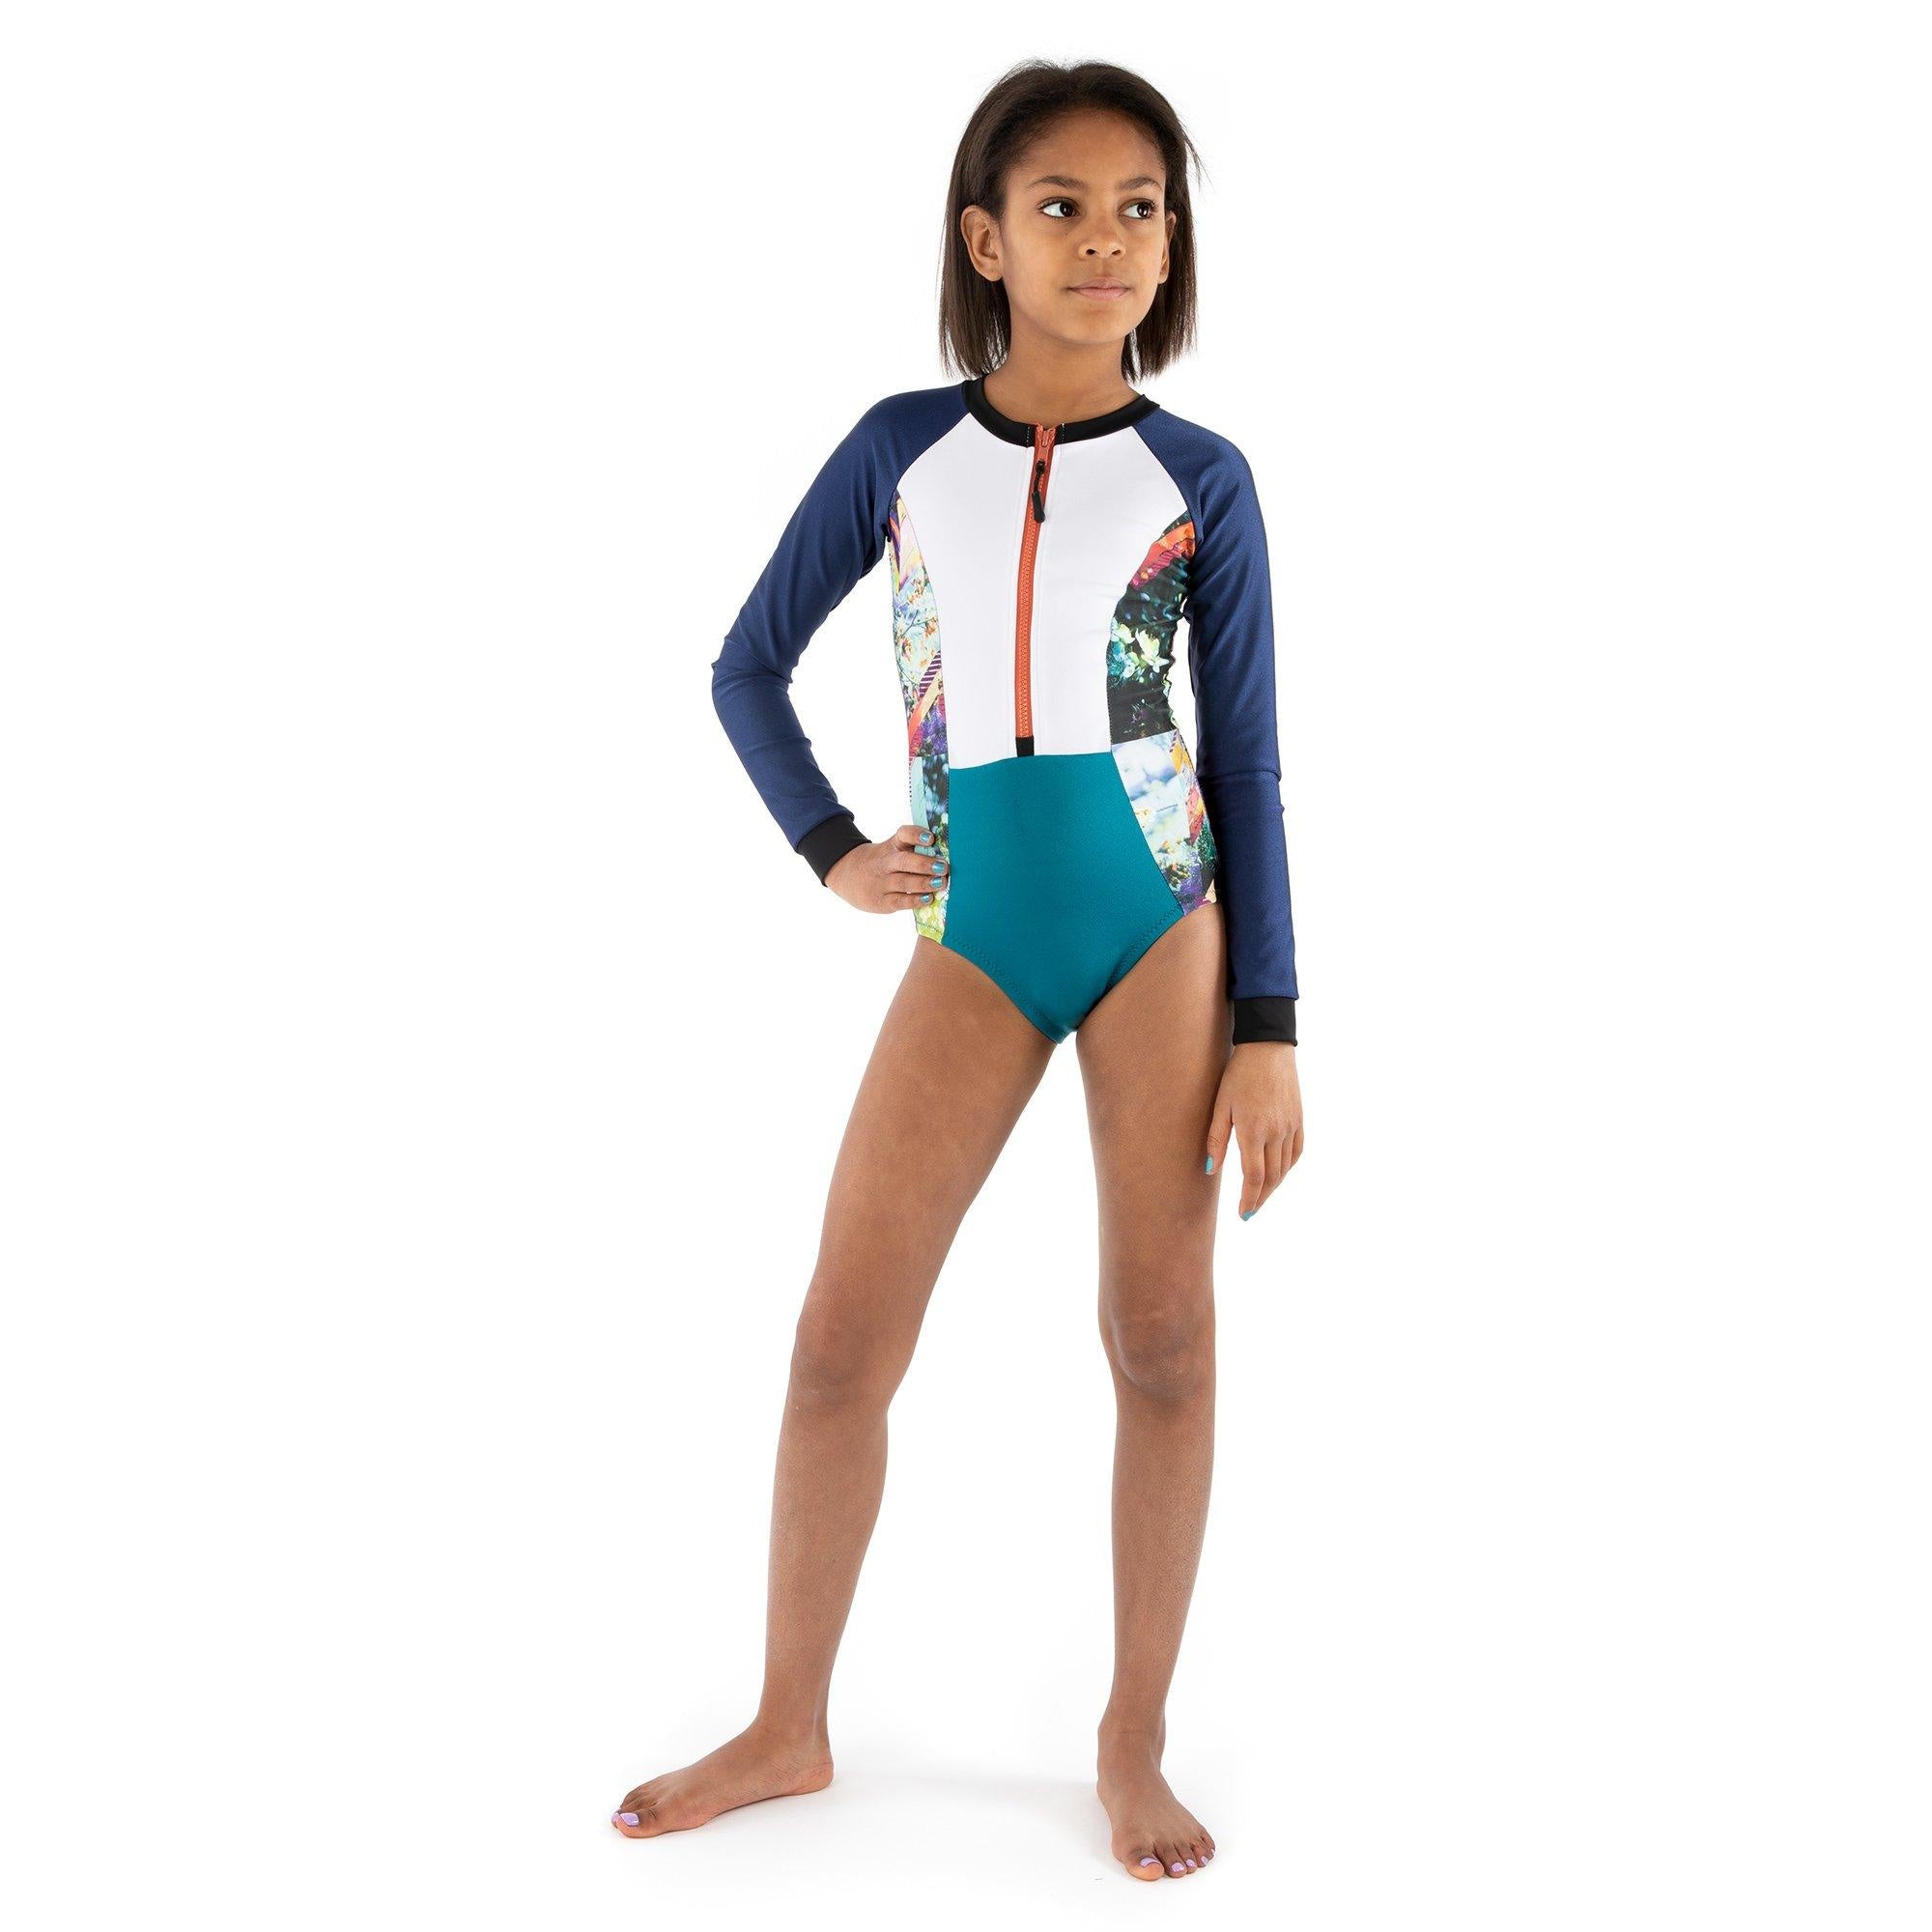 JALIE 4013 - ZOÉ - Long-Sleeve Front-Zip Swimsuit for Girls